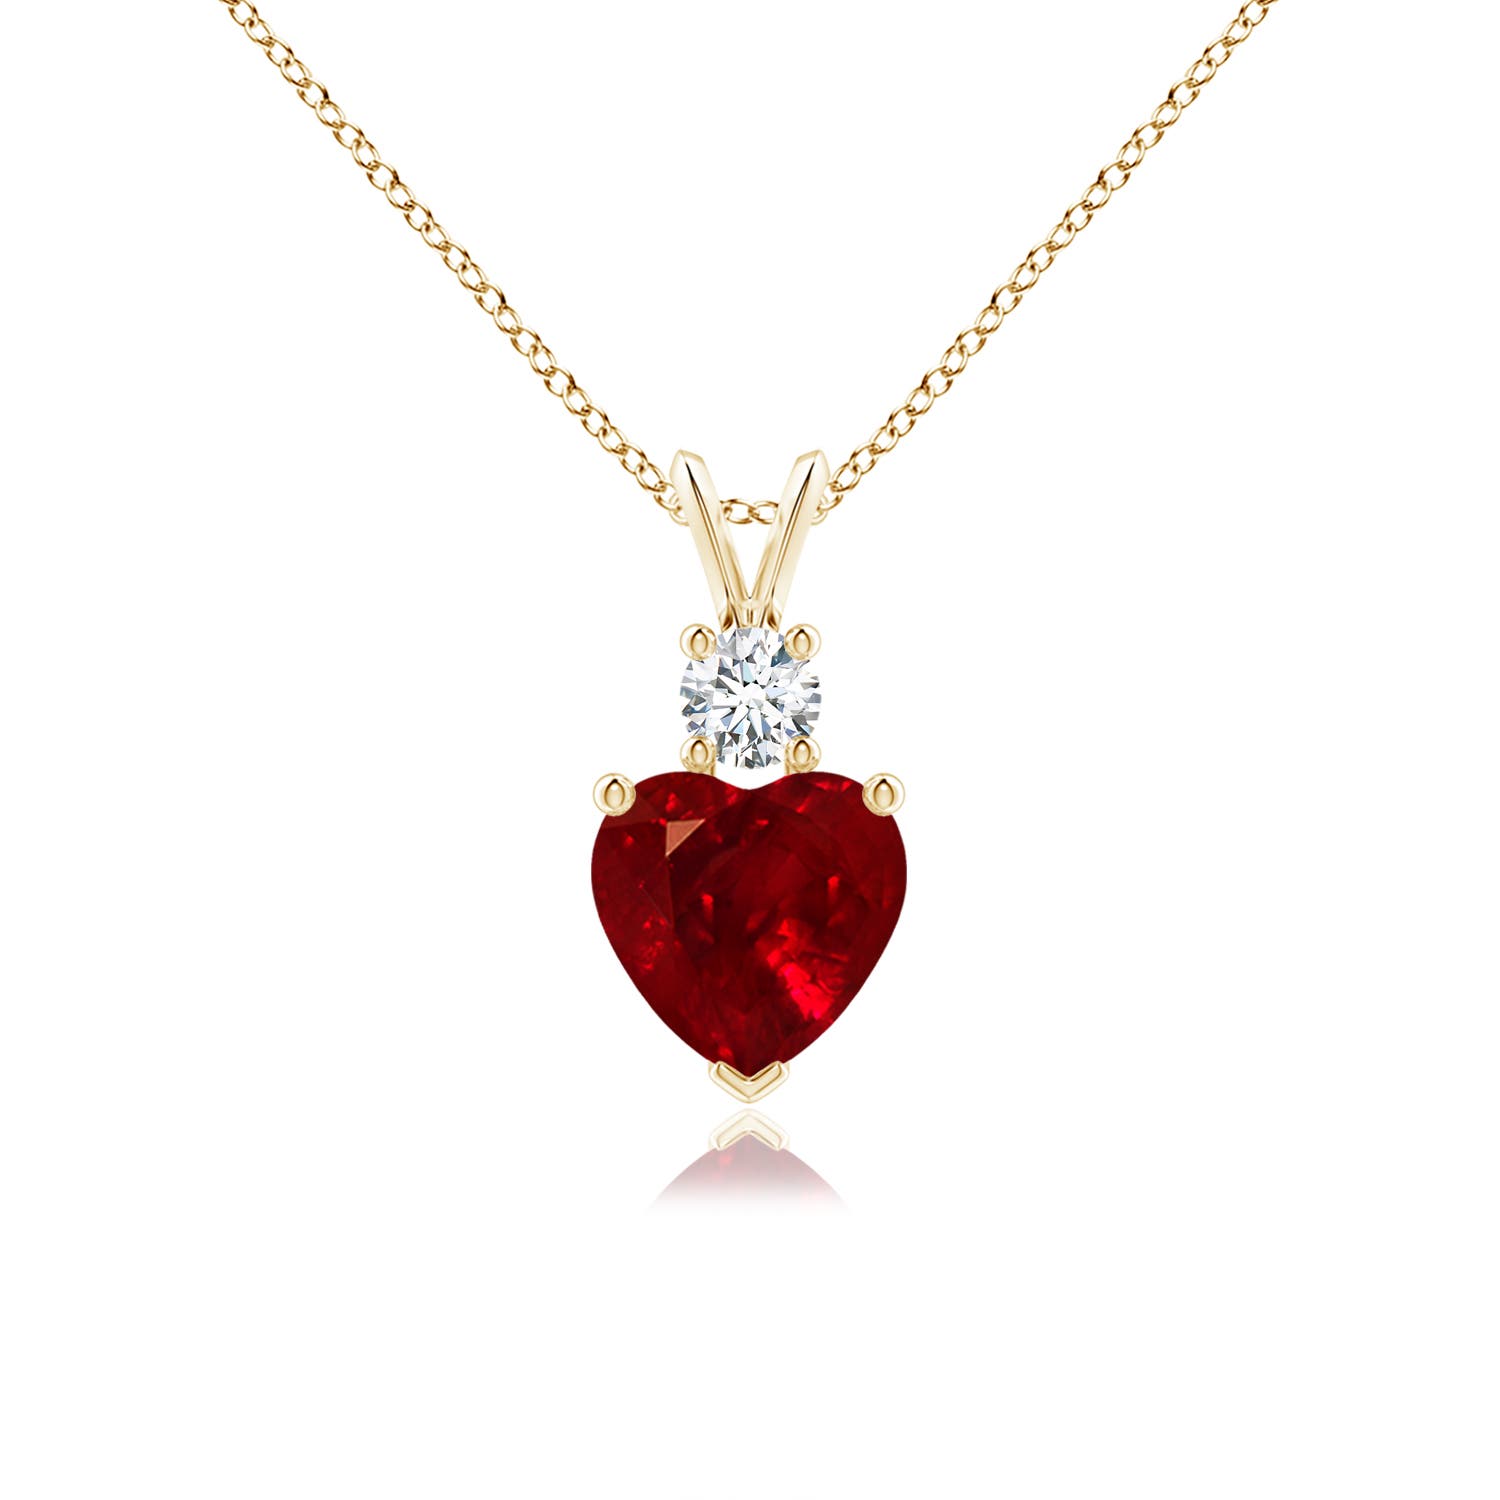 AAAA - Ruby / 1.8 CT / 14 KT Yellow Gold